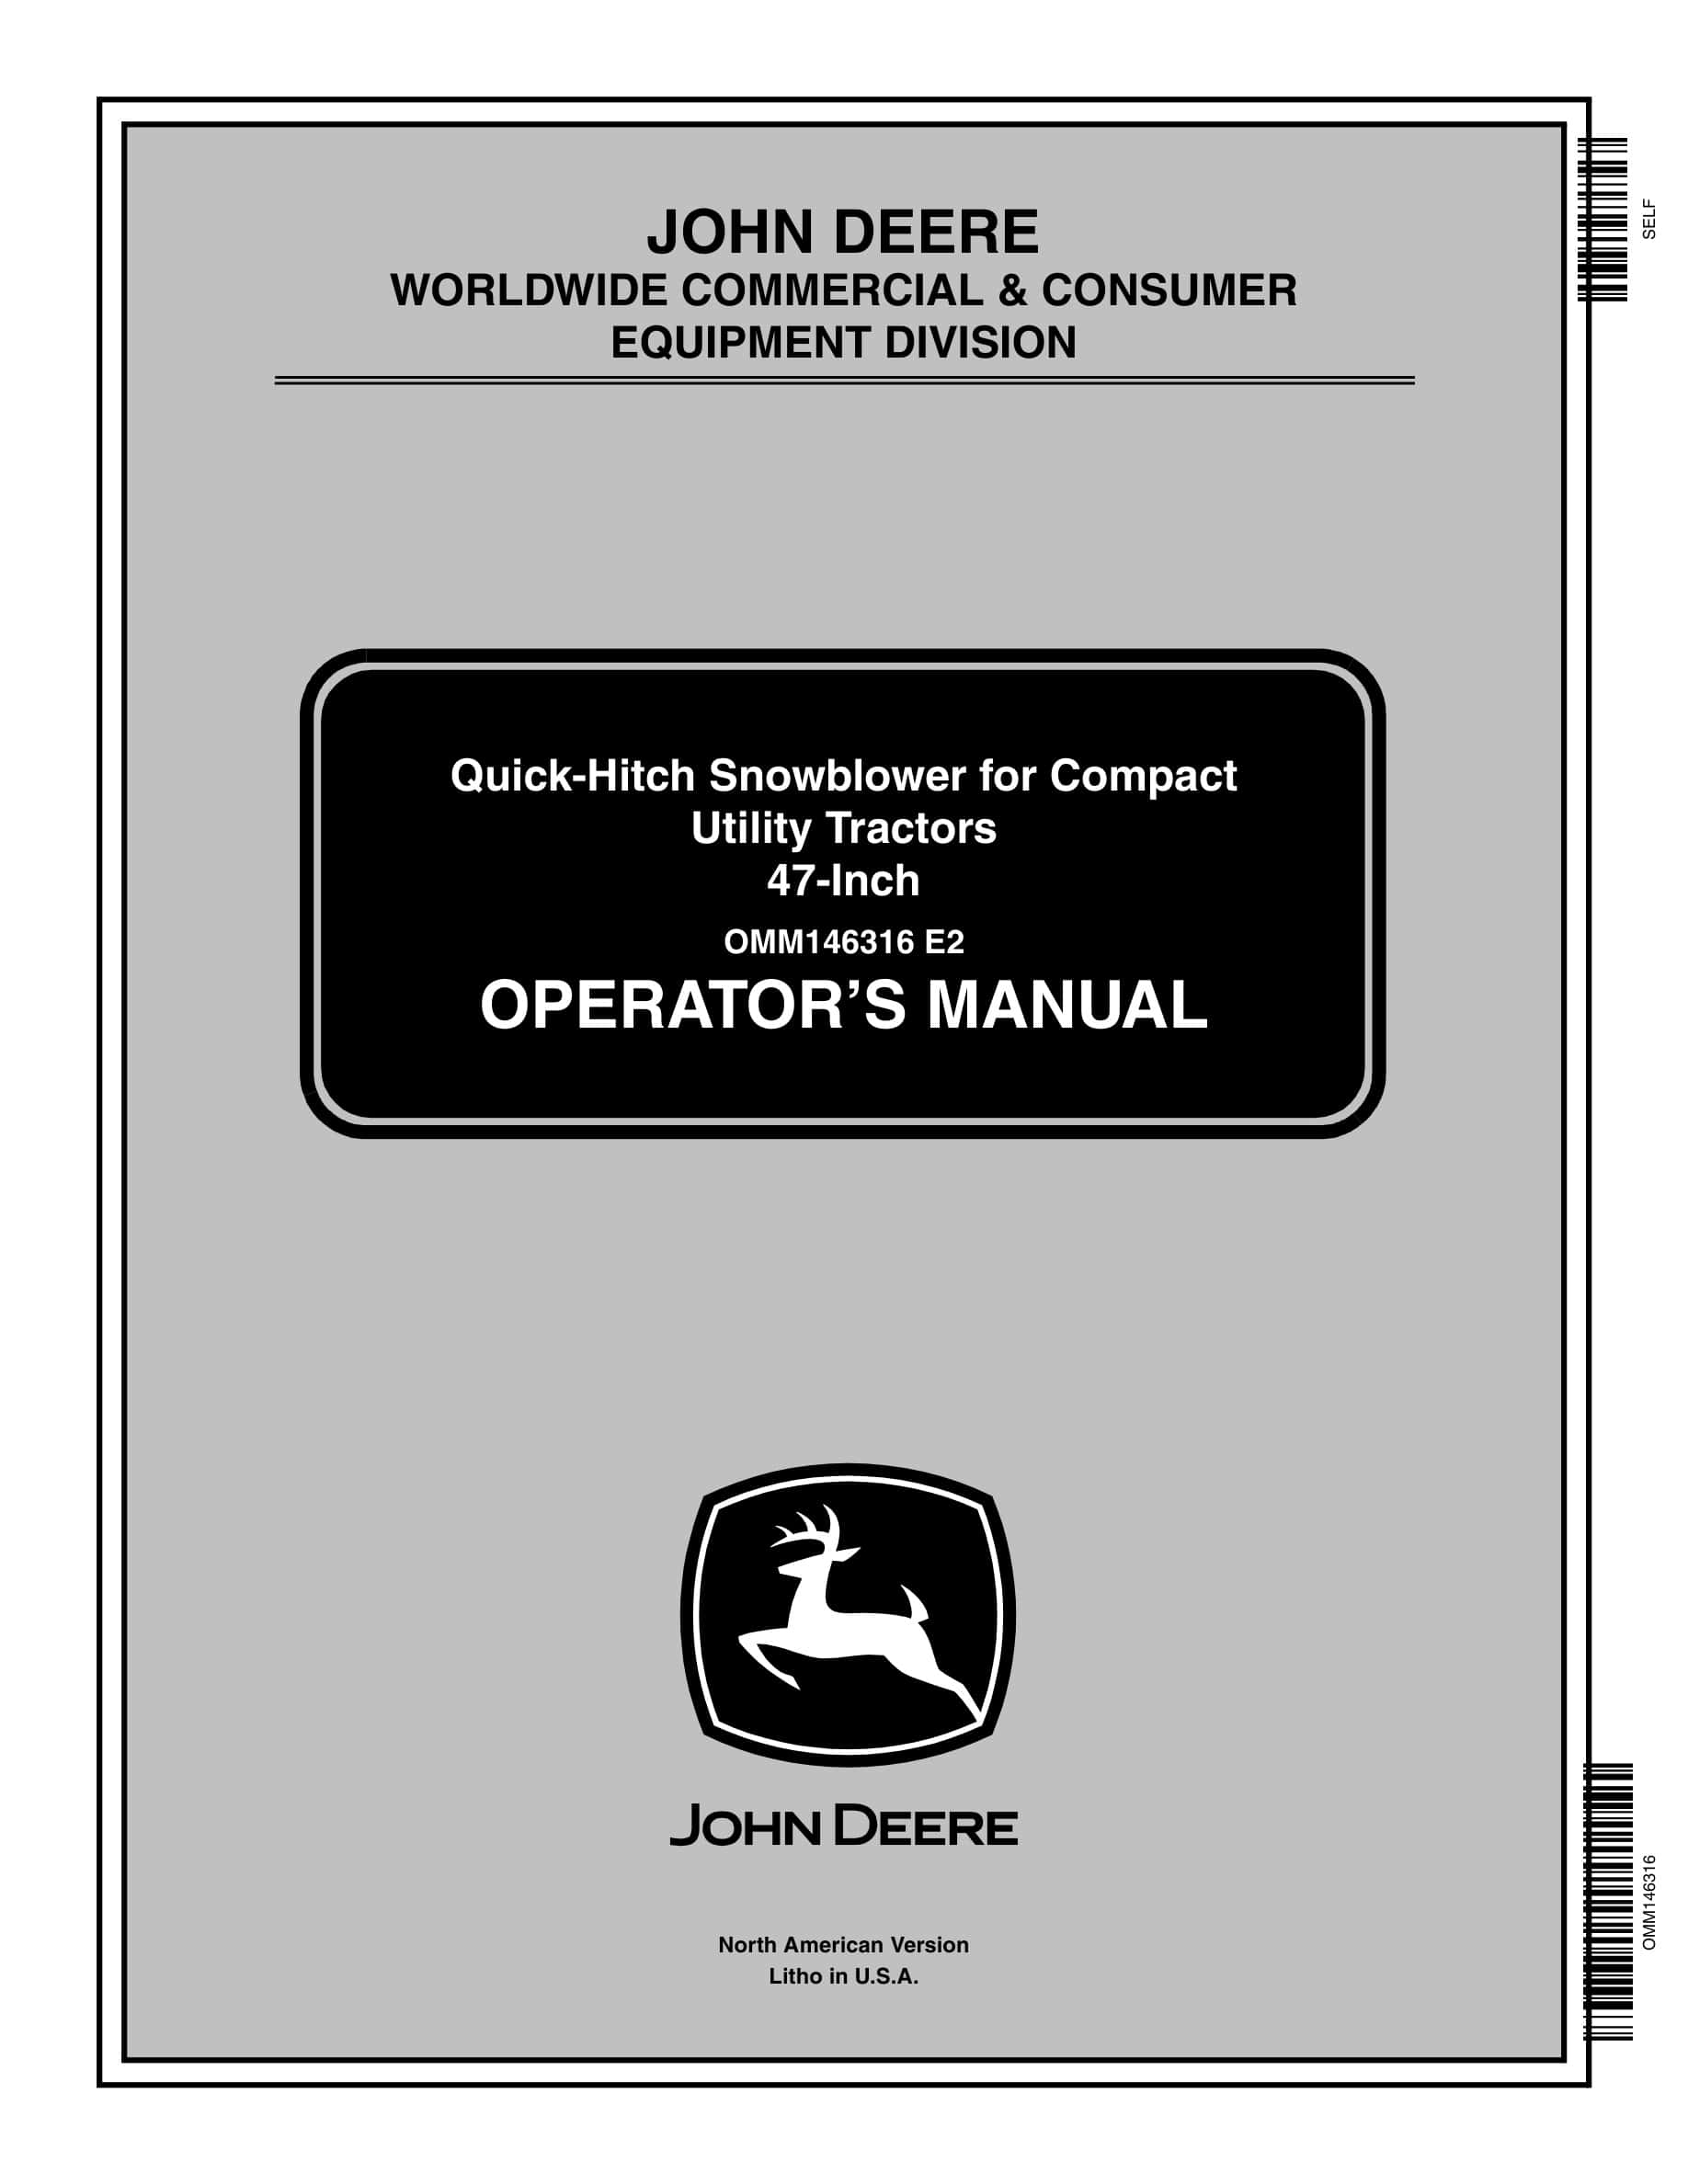 John Deere Quick-hitch Snowblower For 47-inch Compact Utility Tractors Operator Manuals OMM146316-1